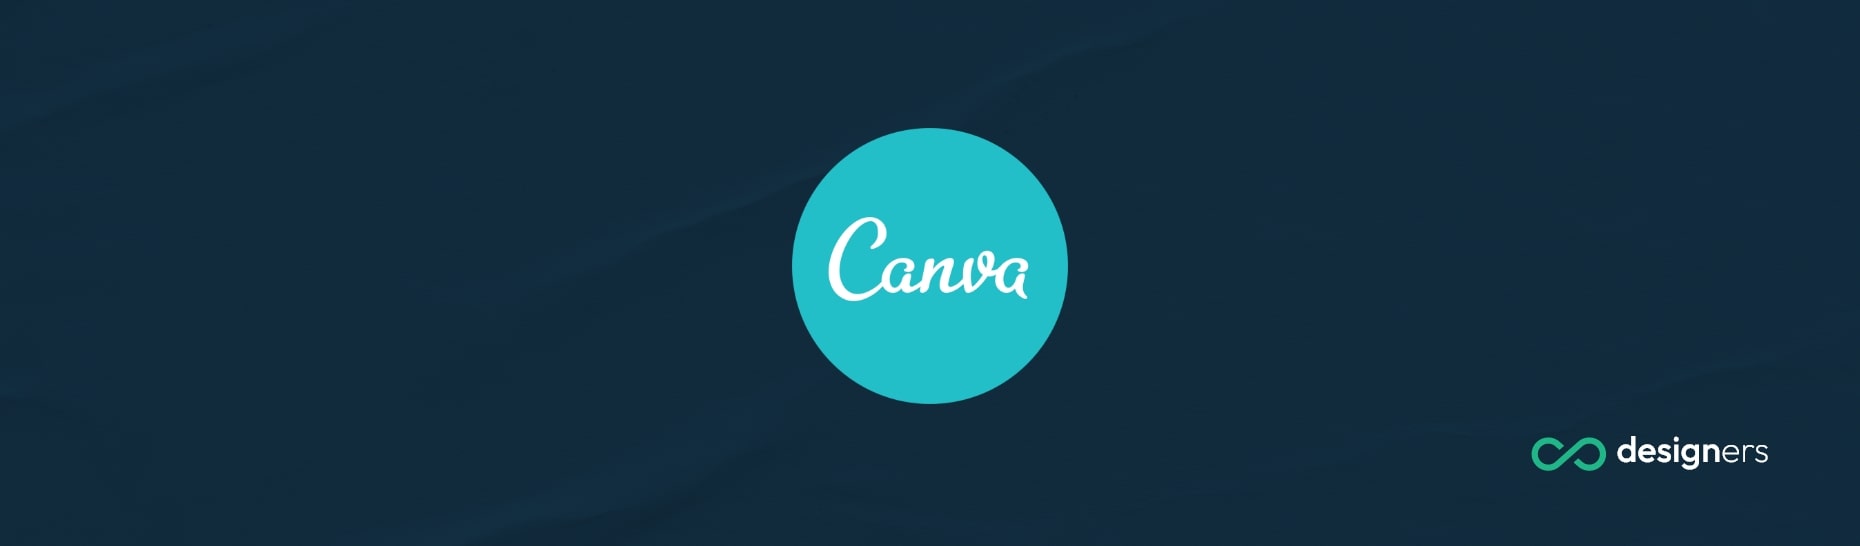 Is Canva Good for Making Ebooks?